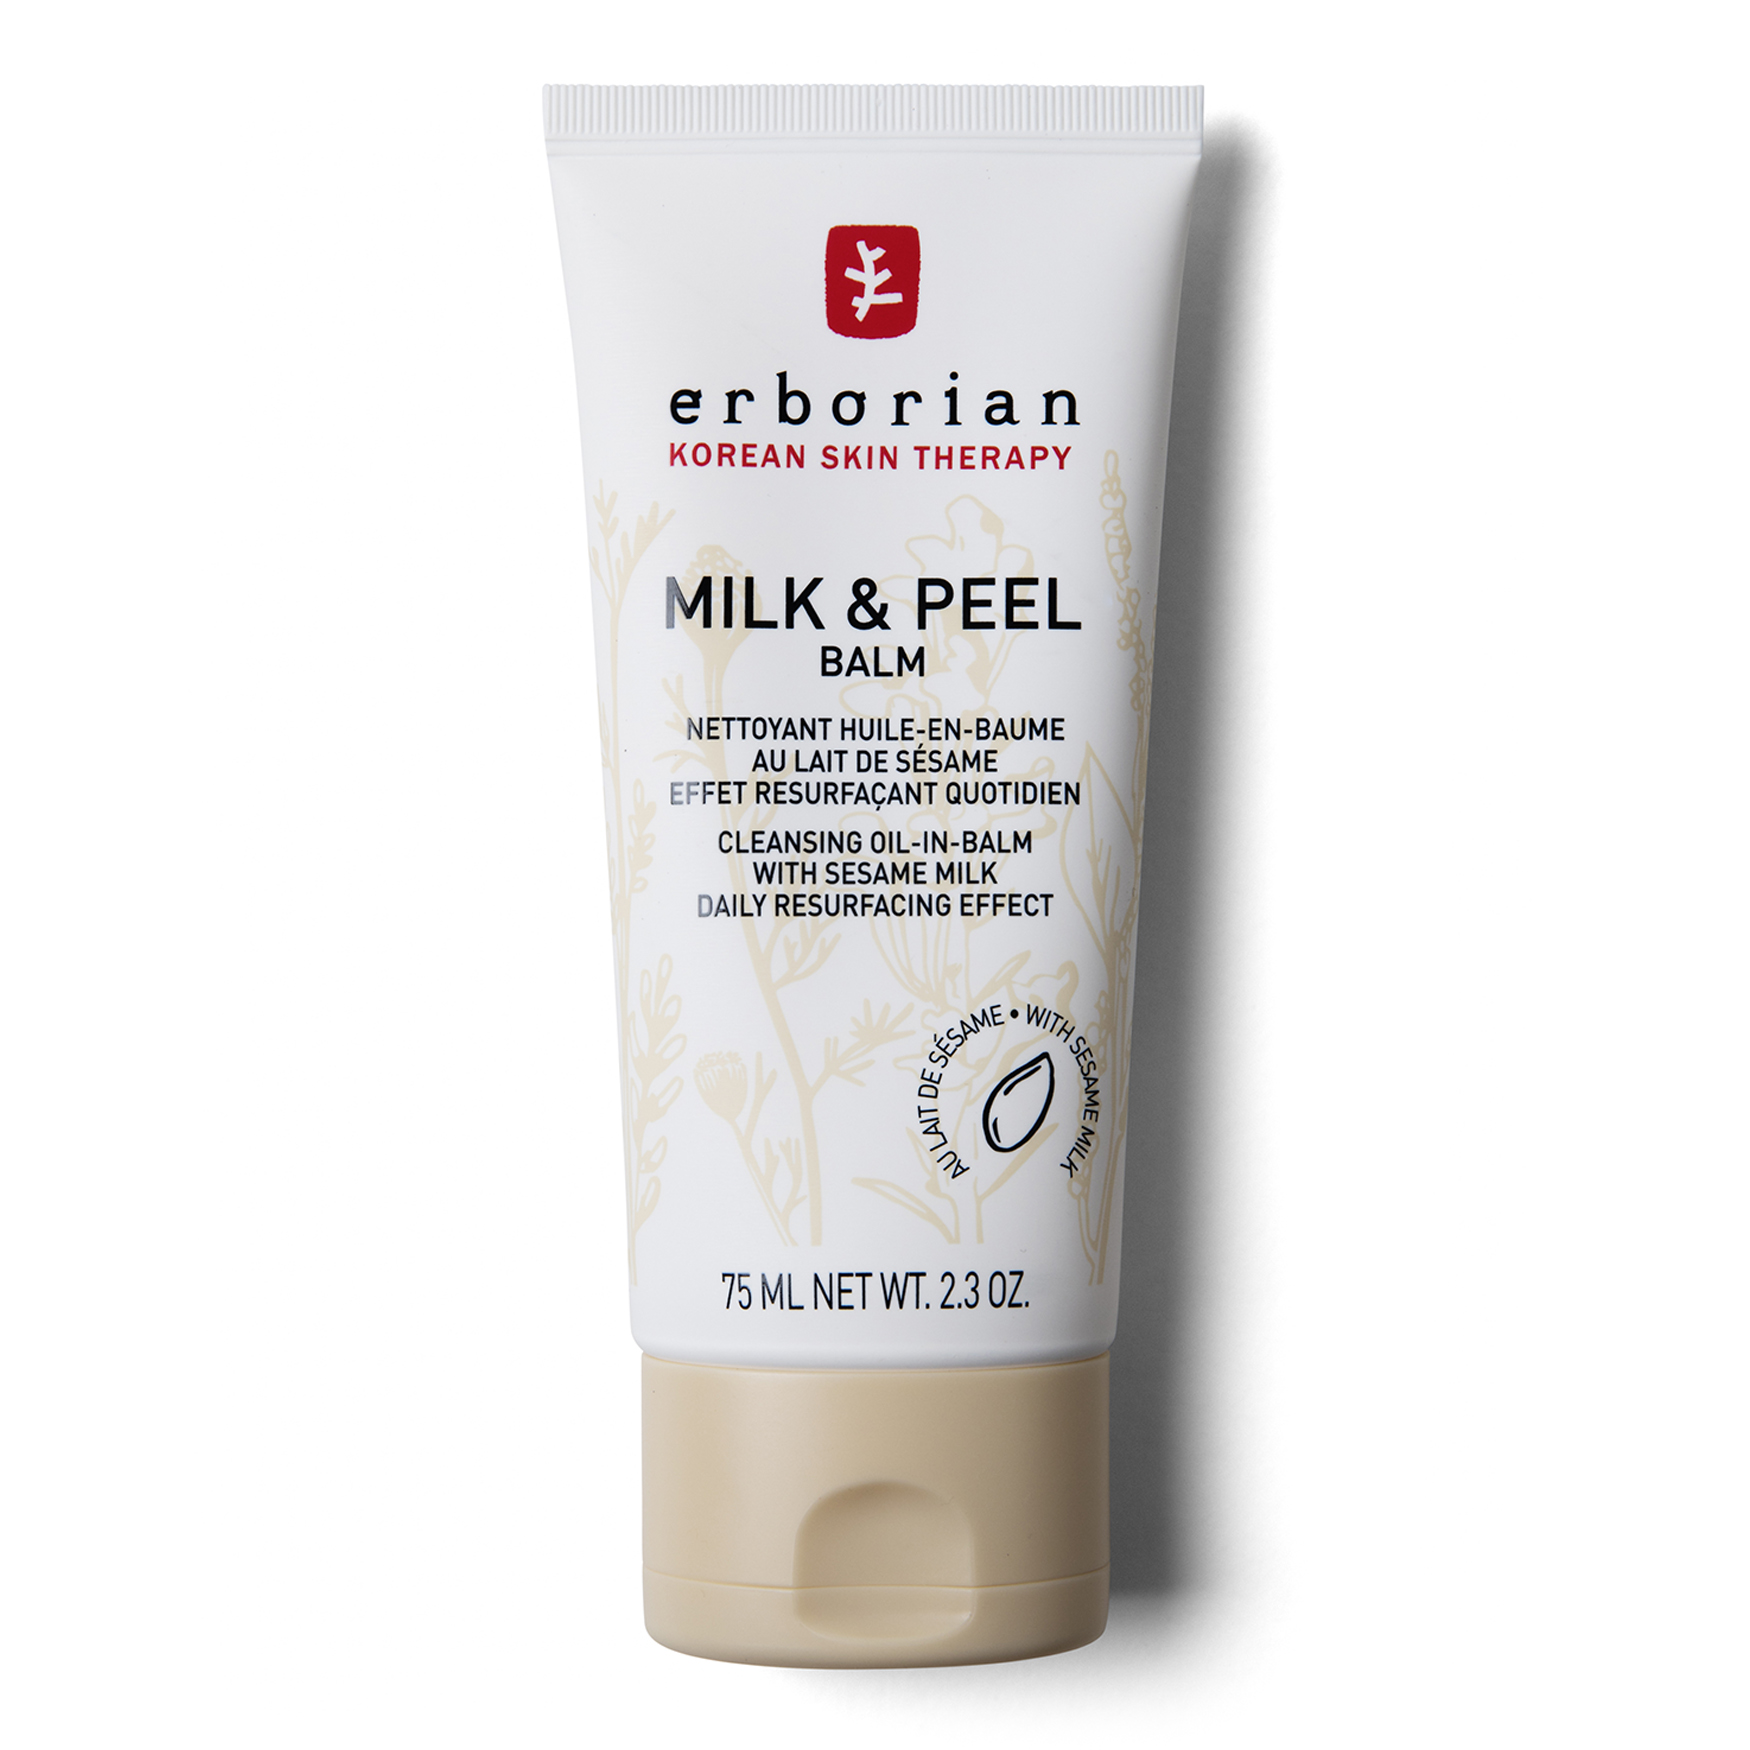 6 Of The Best Erborian Products According To Space NK